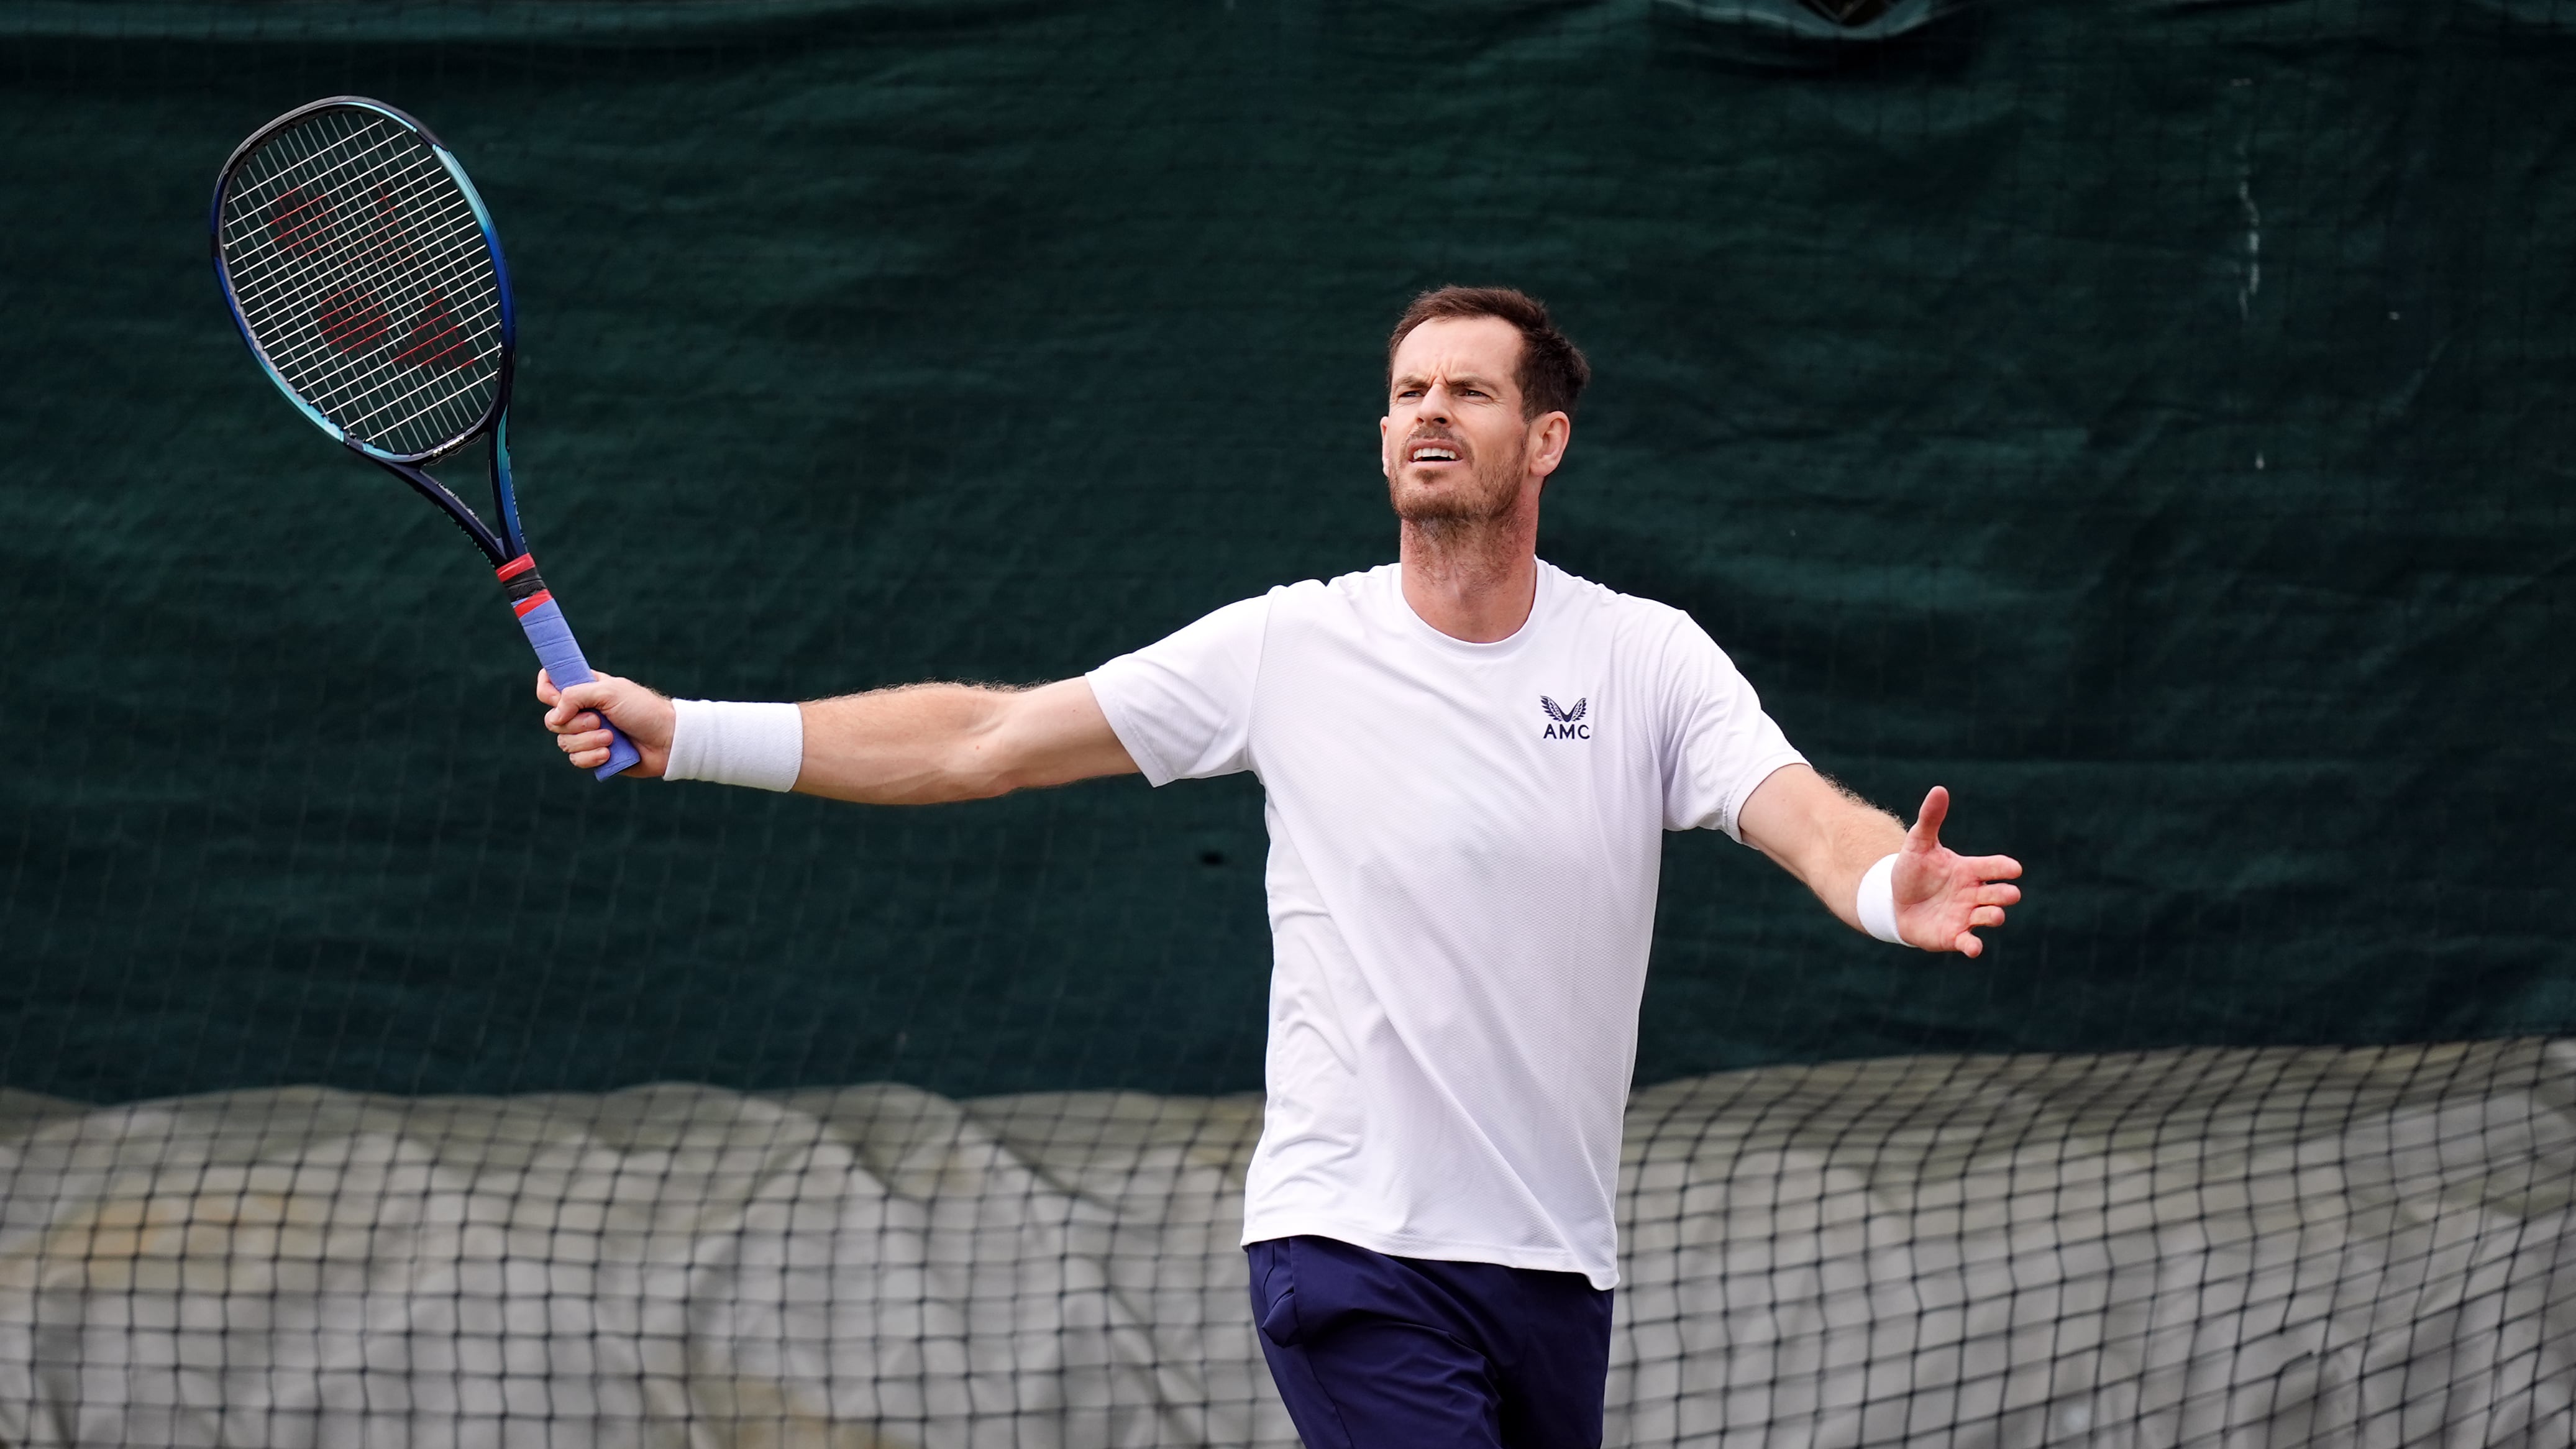 Andy Murray fans wished him well for his retirement as they spoke of their disappointment at not seeing him play in the singles at Wimbledon one last time